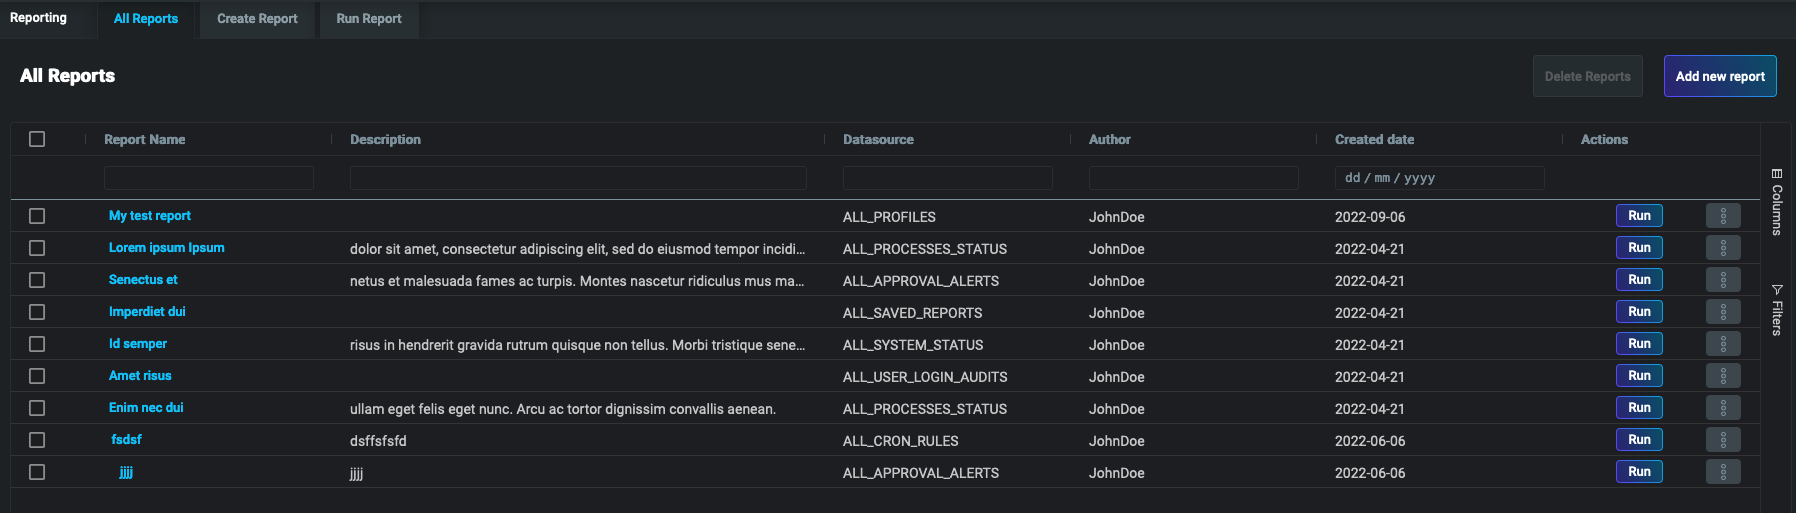 Example showing the list of all generated reports